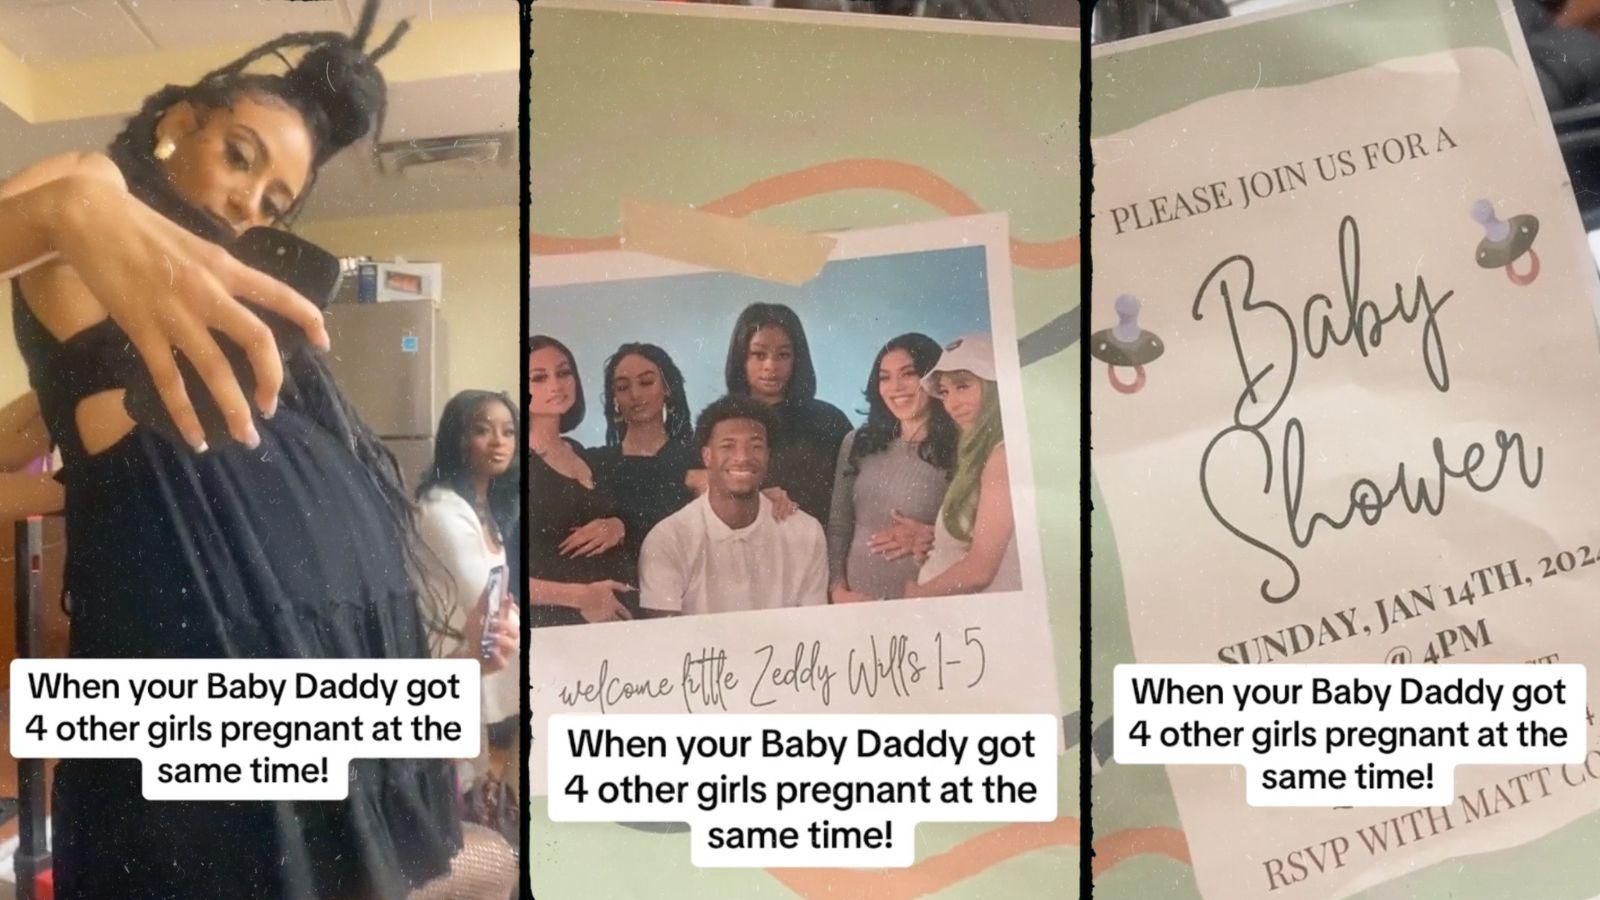 Man gets five women pregnant at the same time